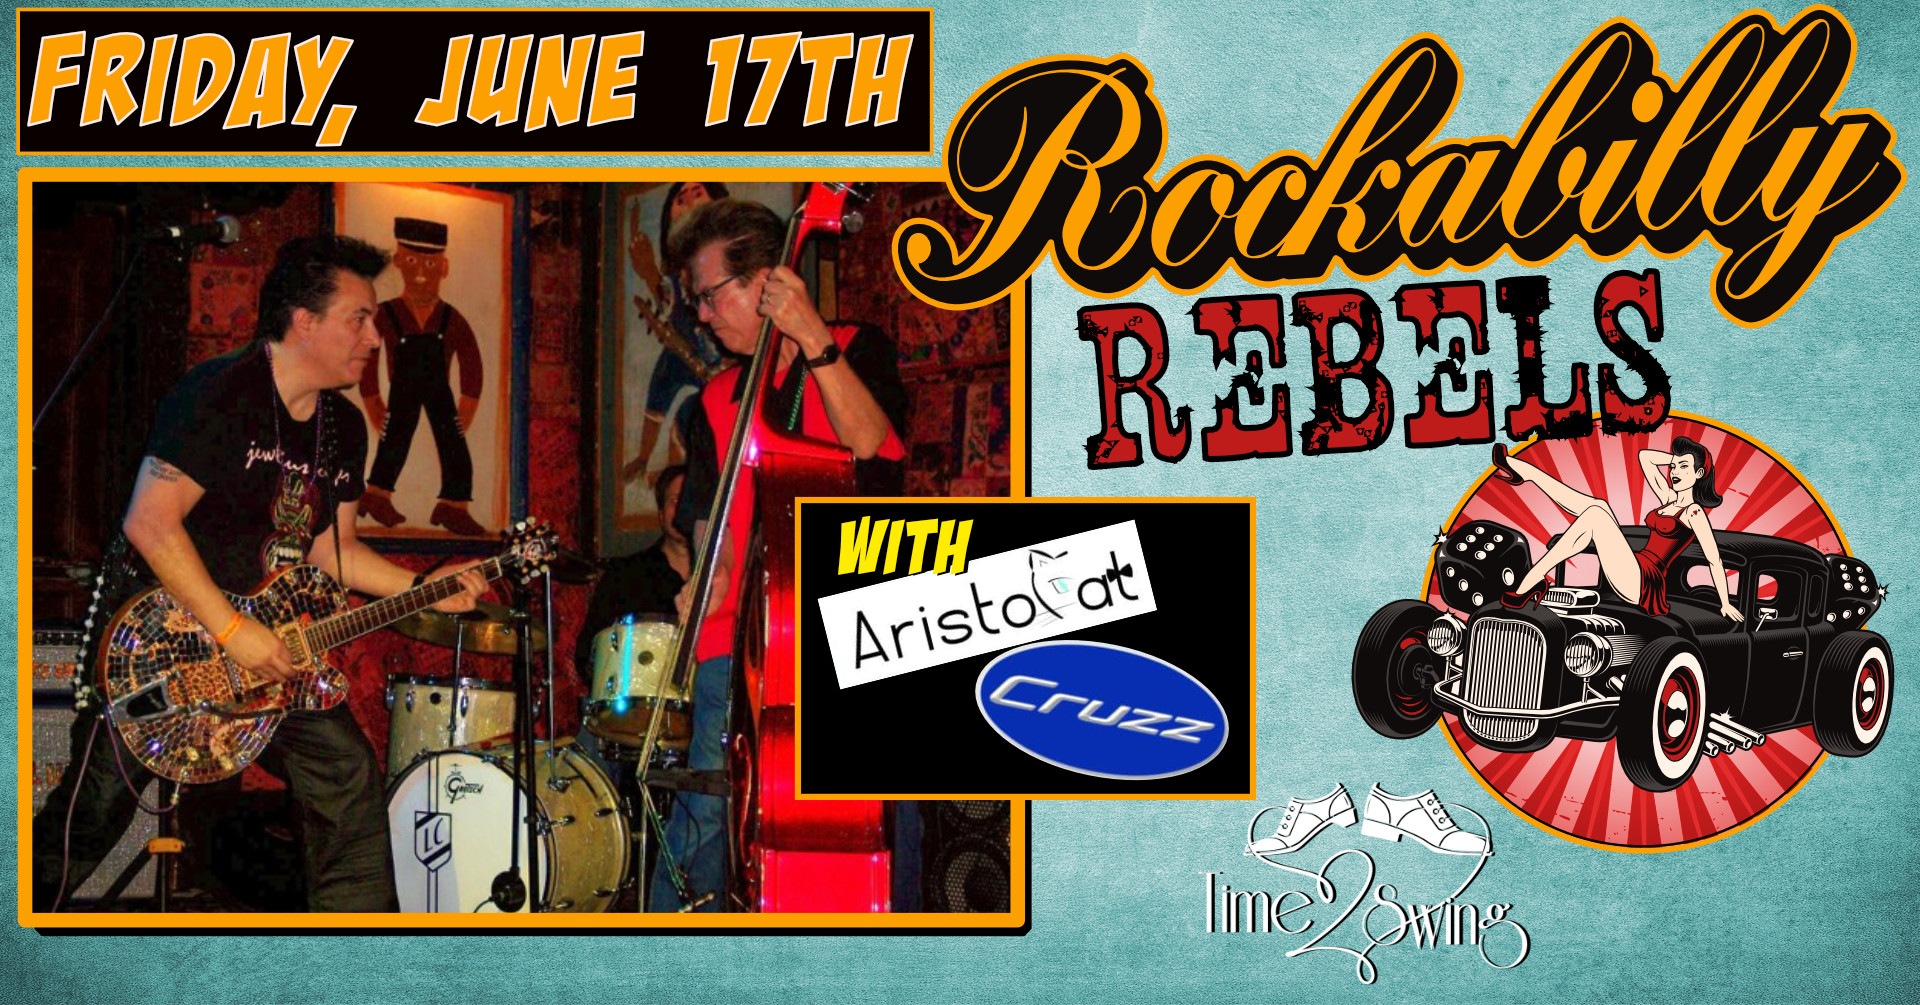 ROCKABILLY REBELS with ARISTOCAT & CRUZZ and TIME2SWING at The Burbank Moose Lodge!